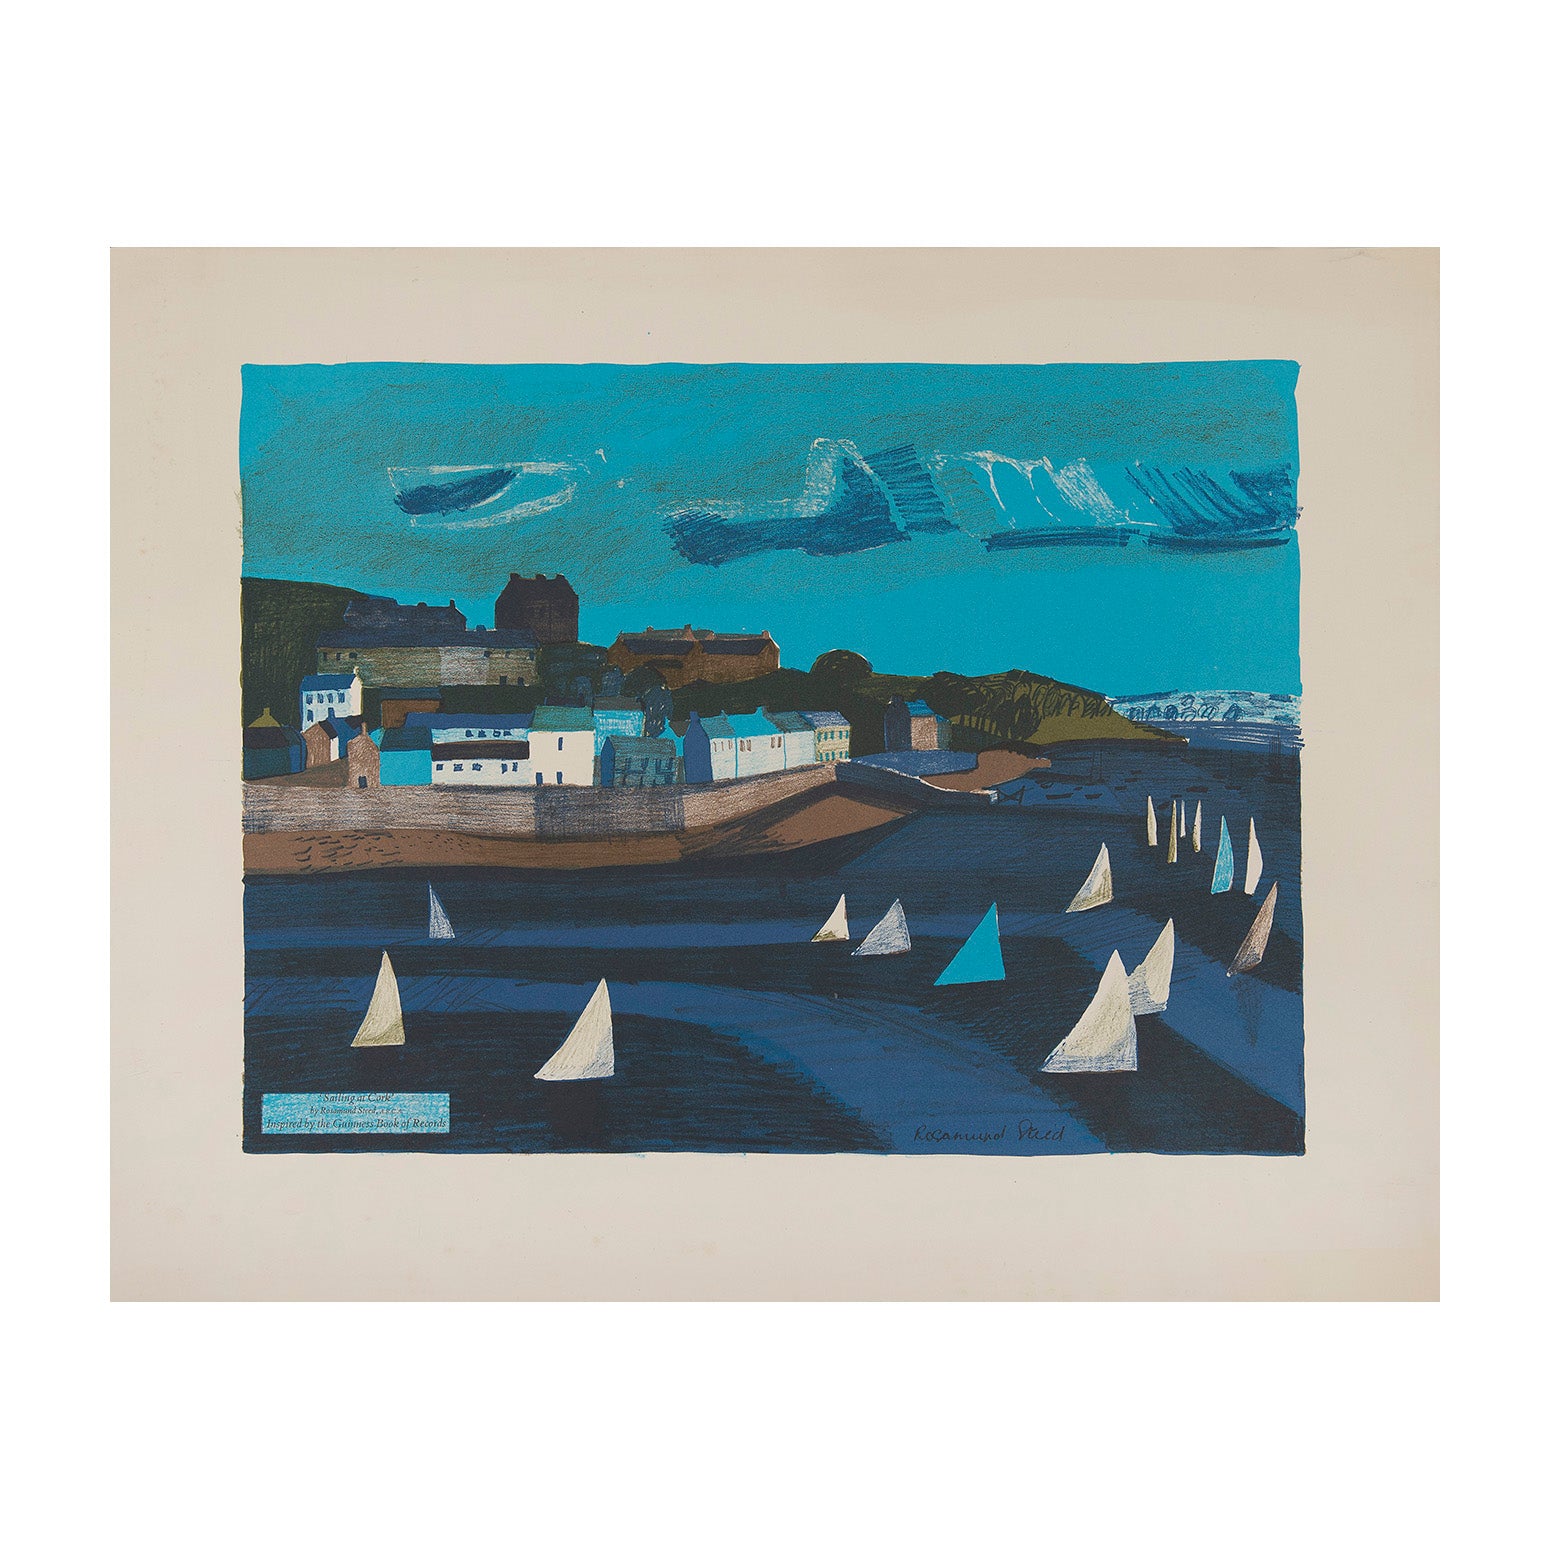 Guinness Lithograph, Sailing at Cork by Rosamund Steed, printed by the Curwen Studio and published in 1962